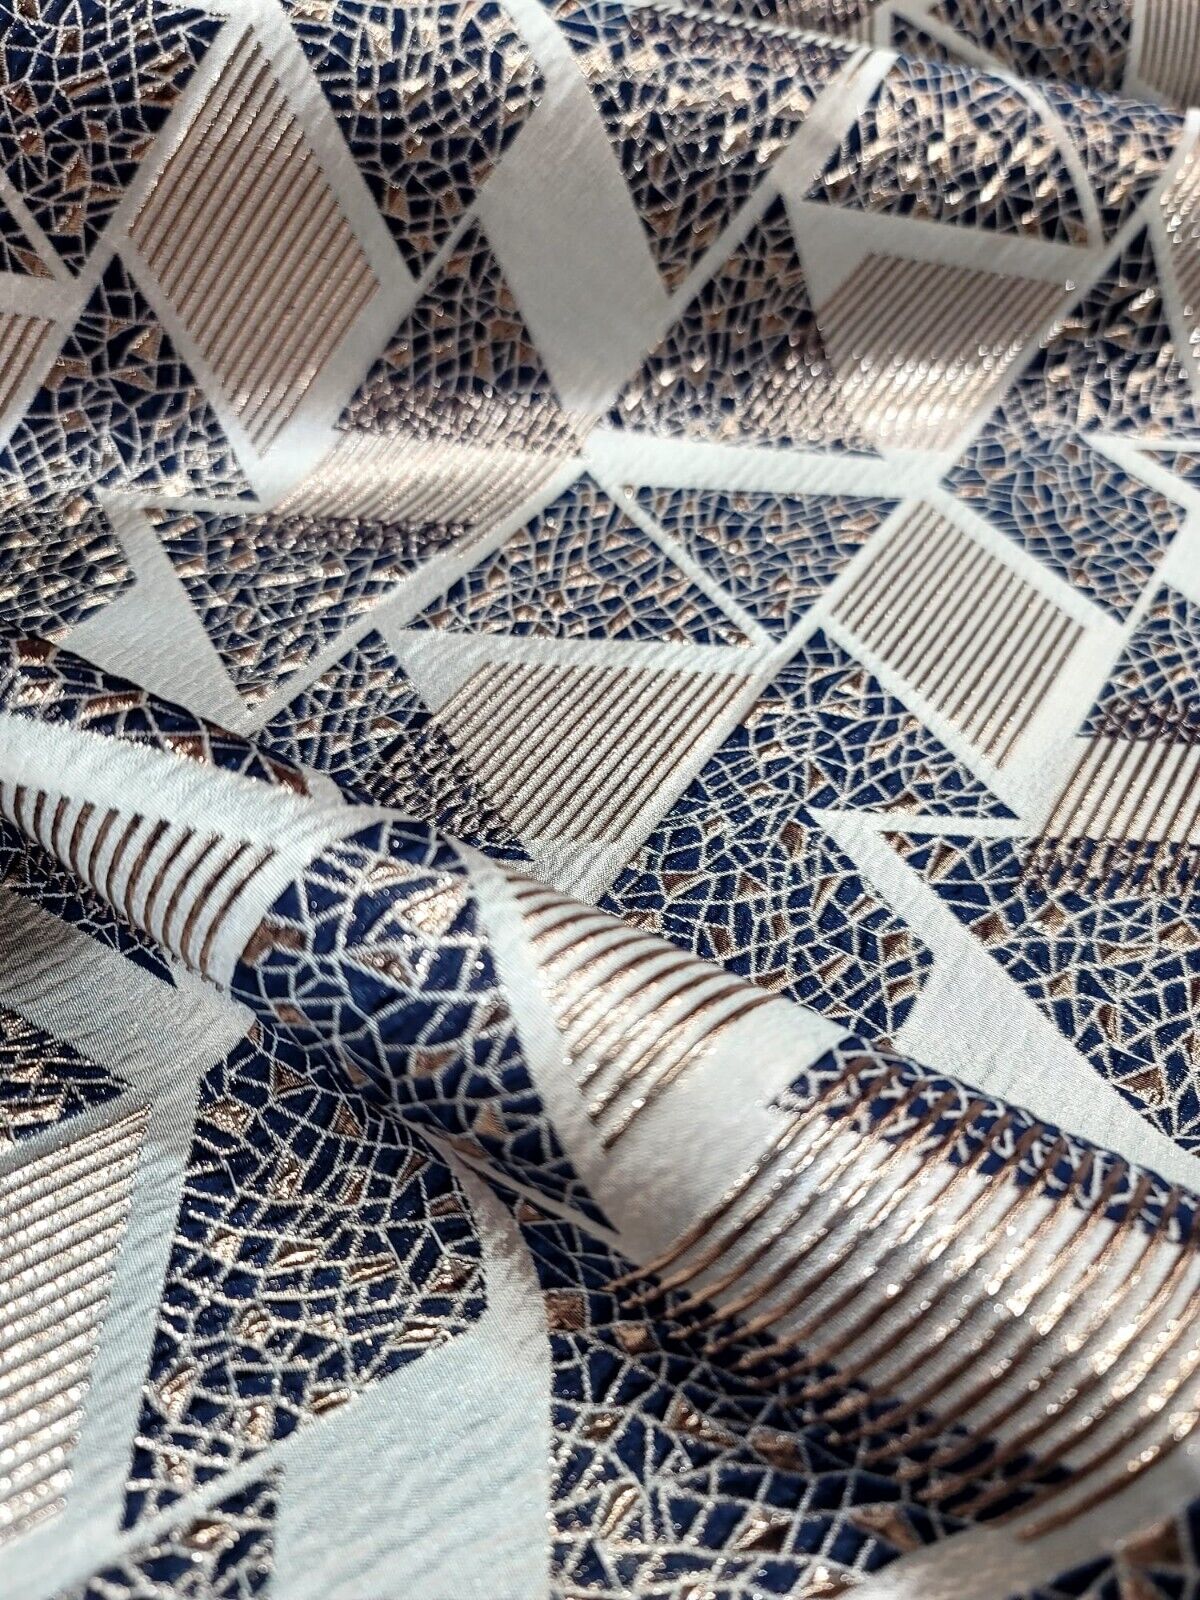 Navy Blue and Gold Metallic Geometric Triangle Brocade Fabric - Sold by Yard - Perfect for Fashion, Upholstery, and Elegant Creations